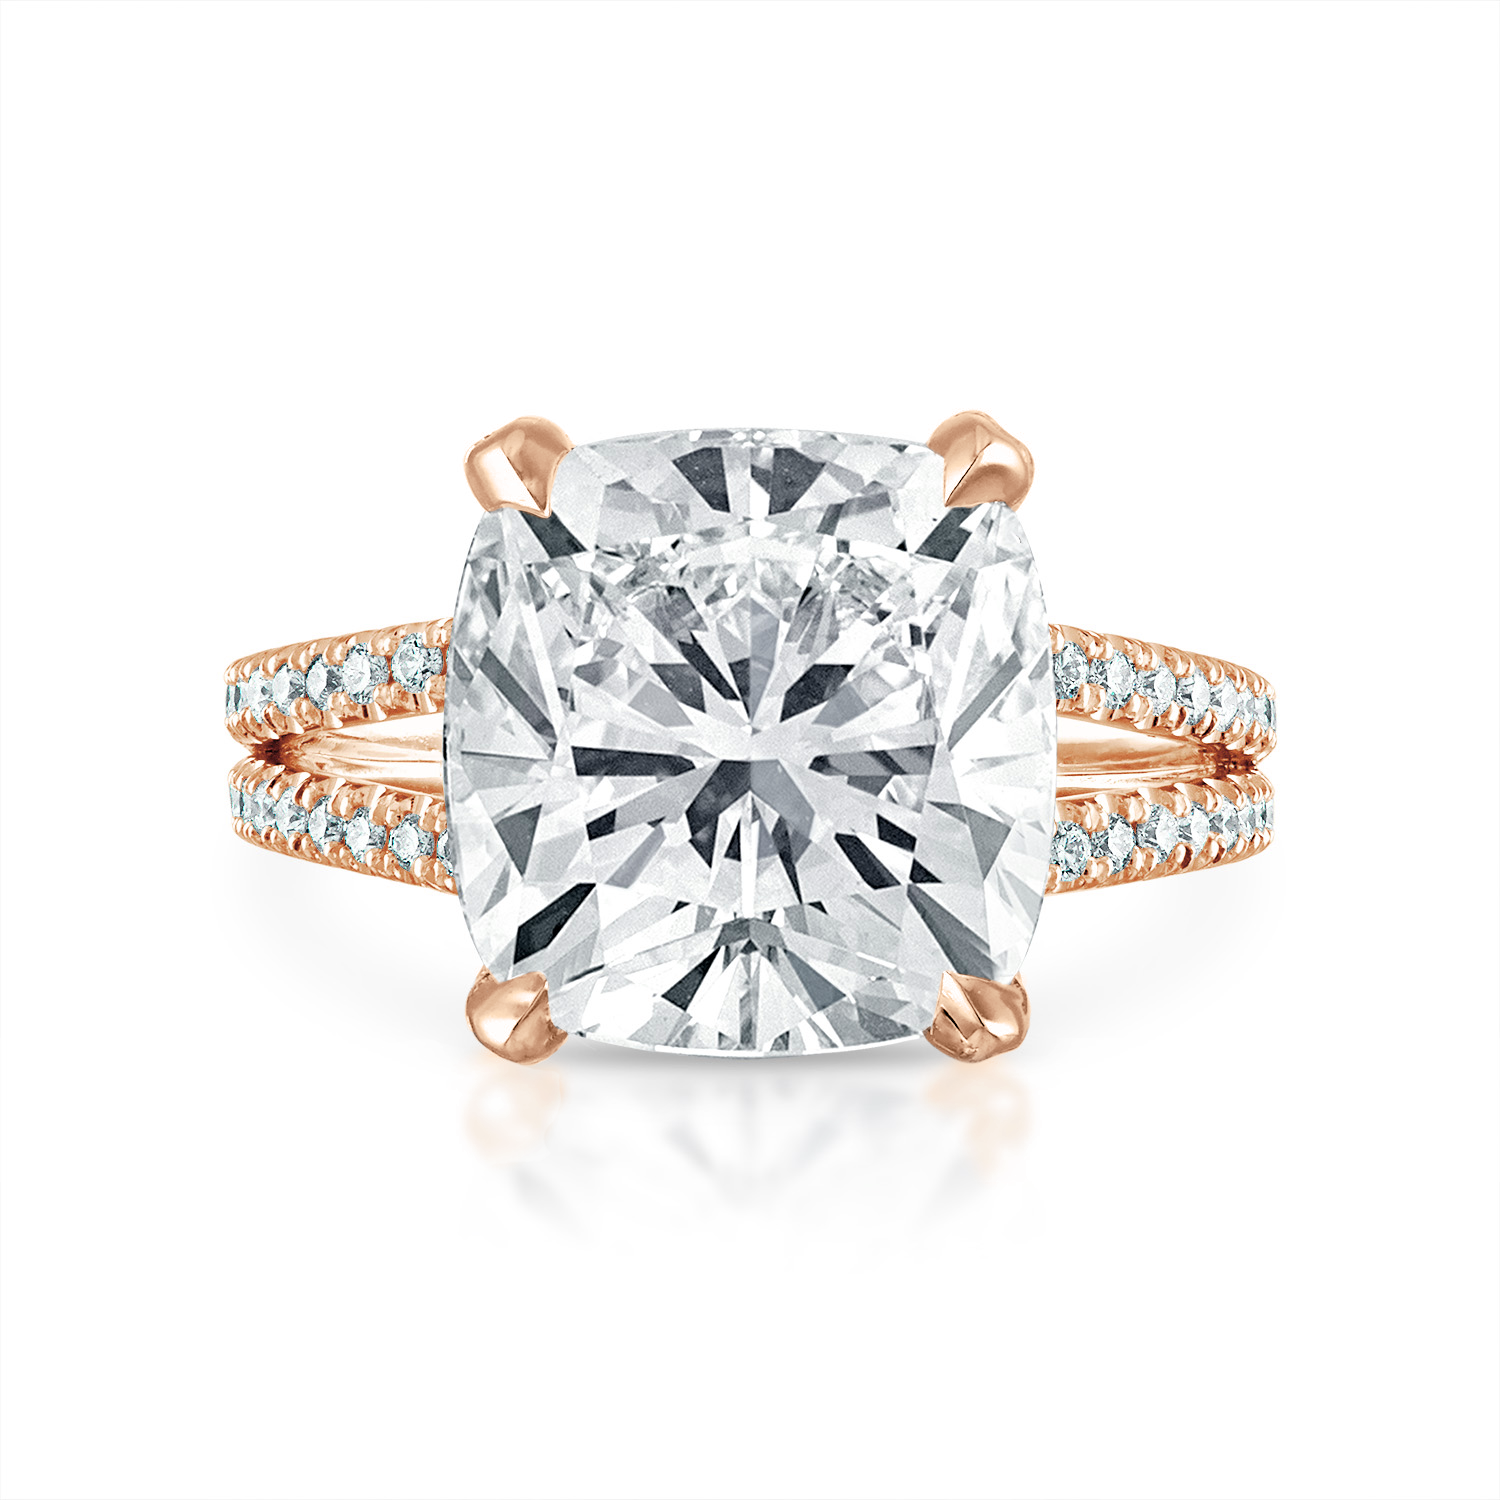 Cushion Pave Split Shank Engagement Ring in Rose Gold